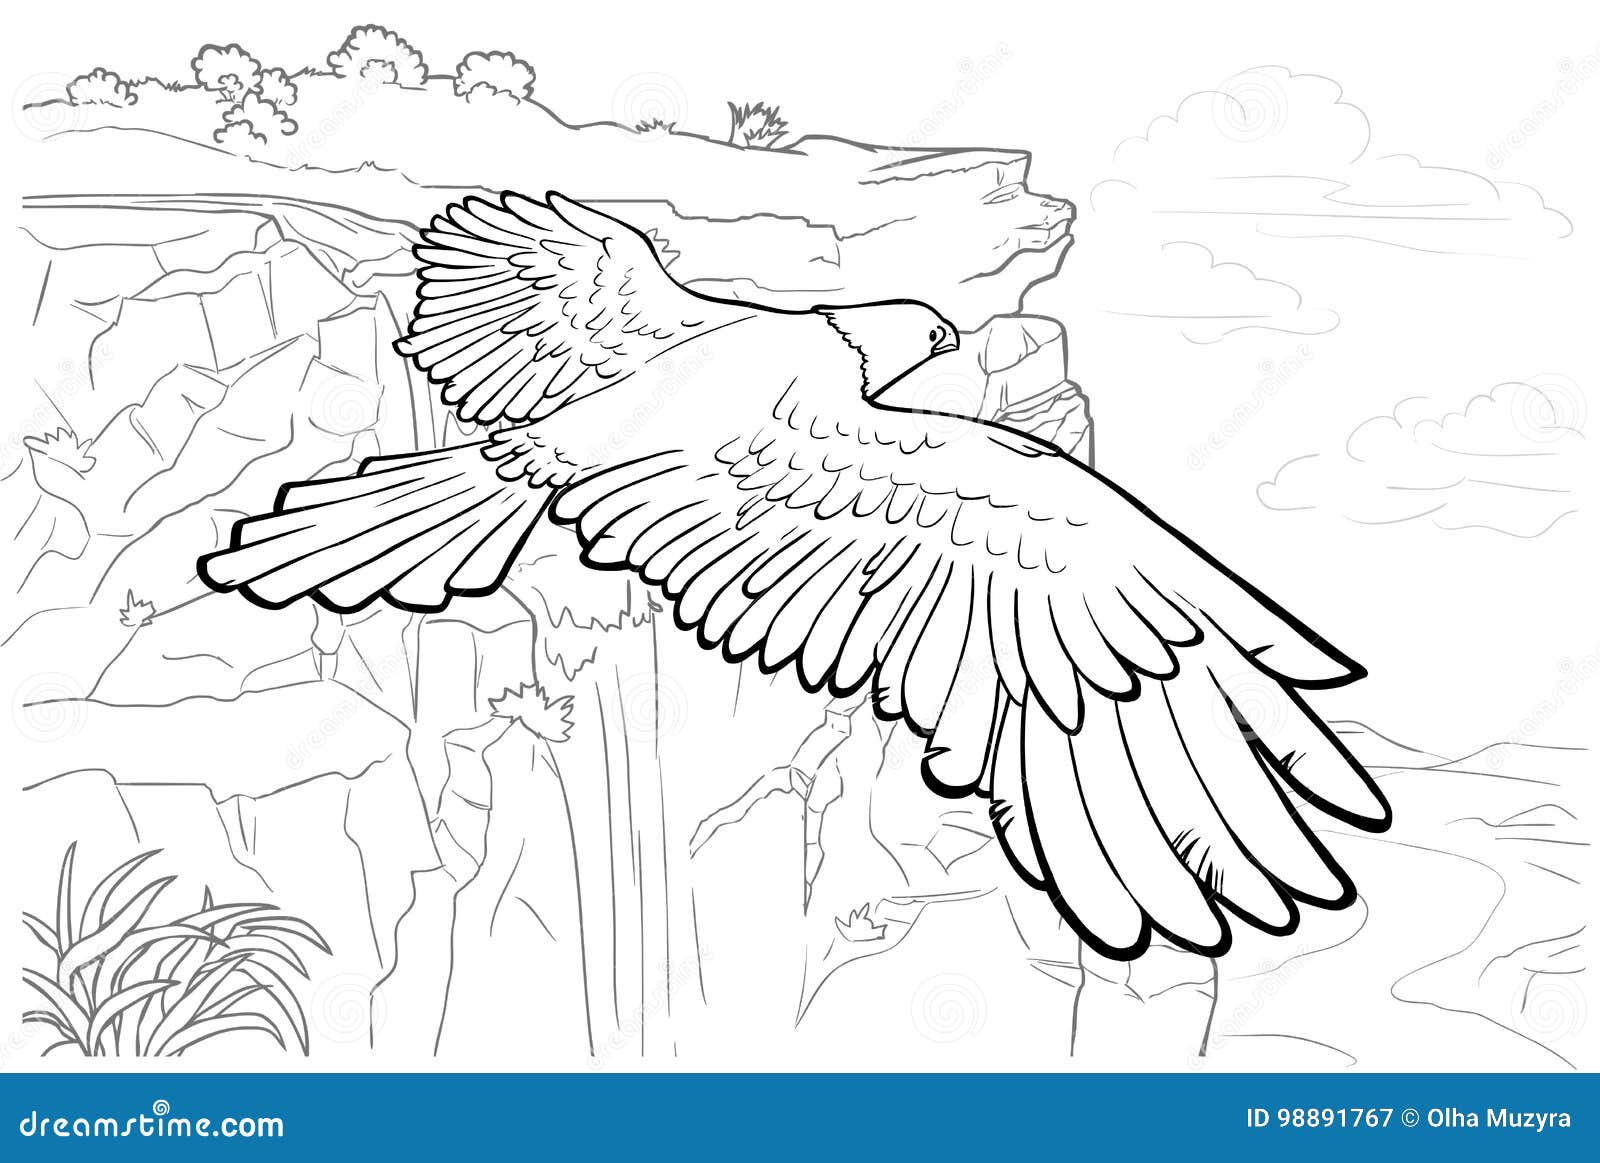 Coloring page fly of eagle stock illustration illustration of gray